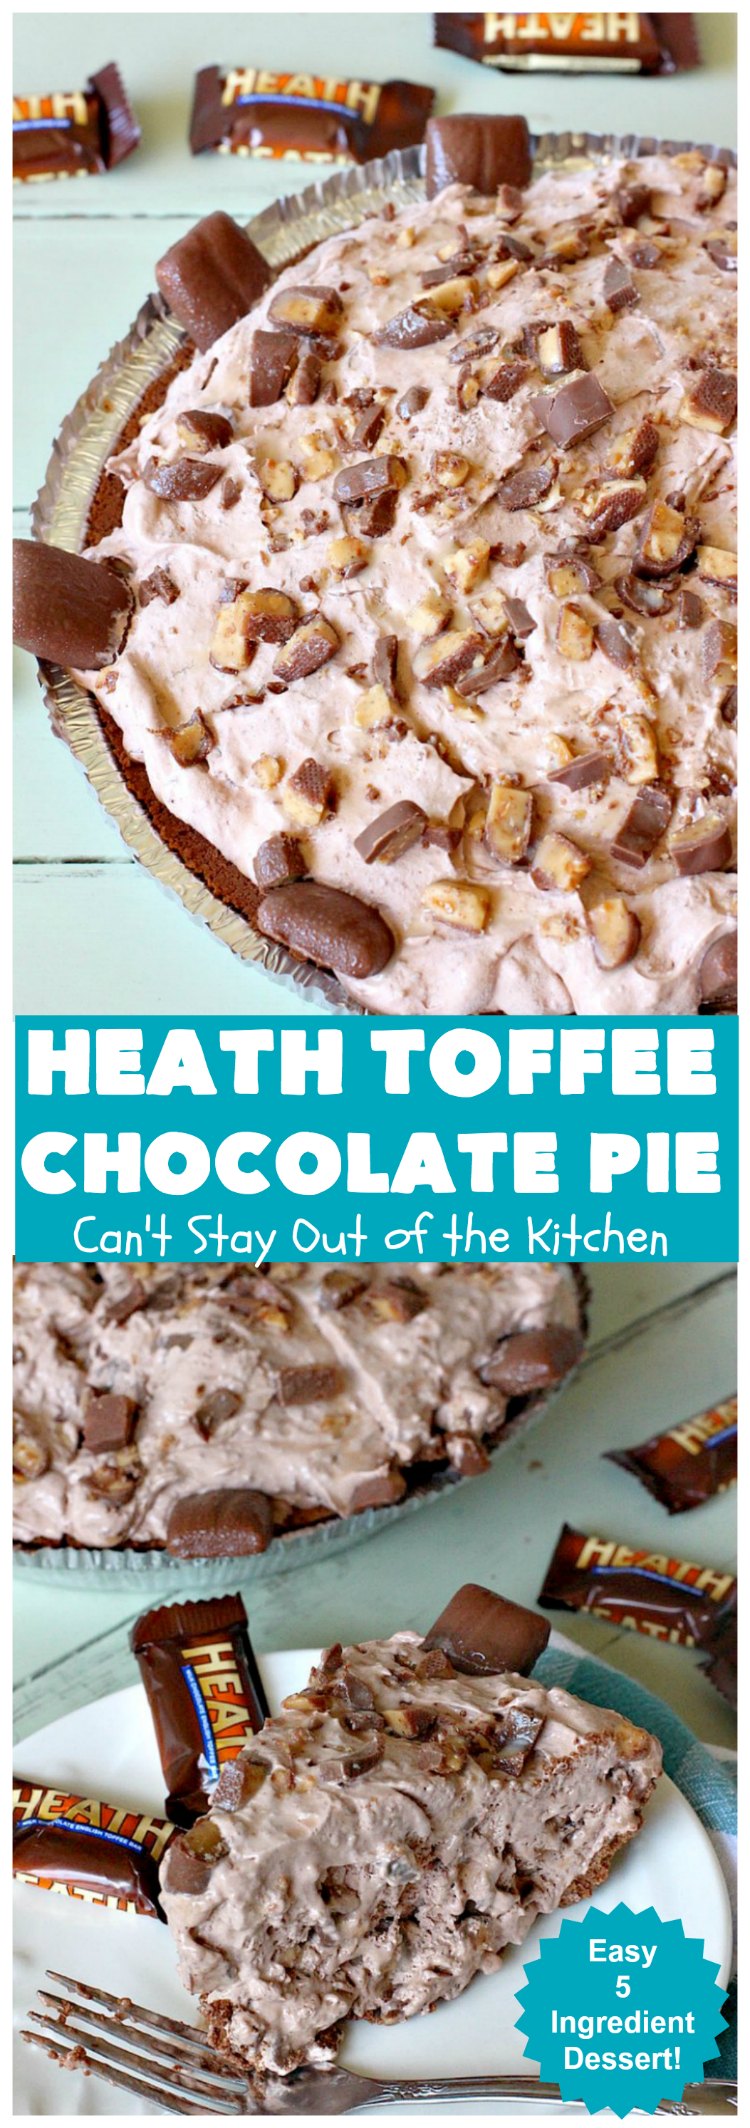 Heath Toffee Chocolate Pie | Can't Stay Out of the Kitchen